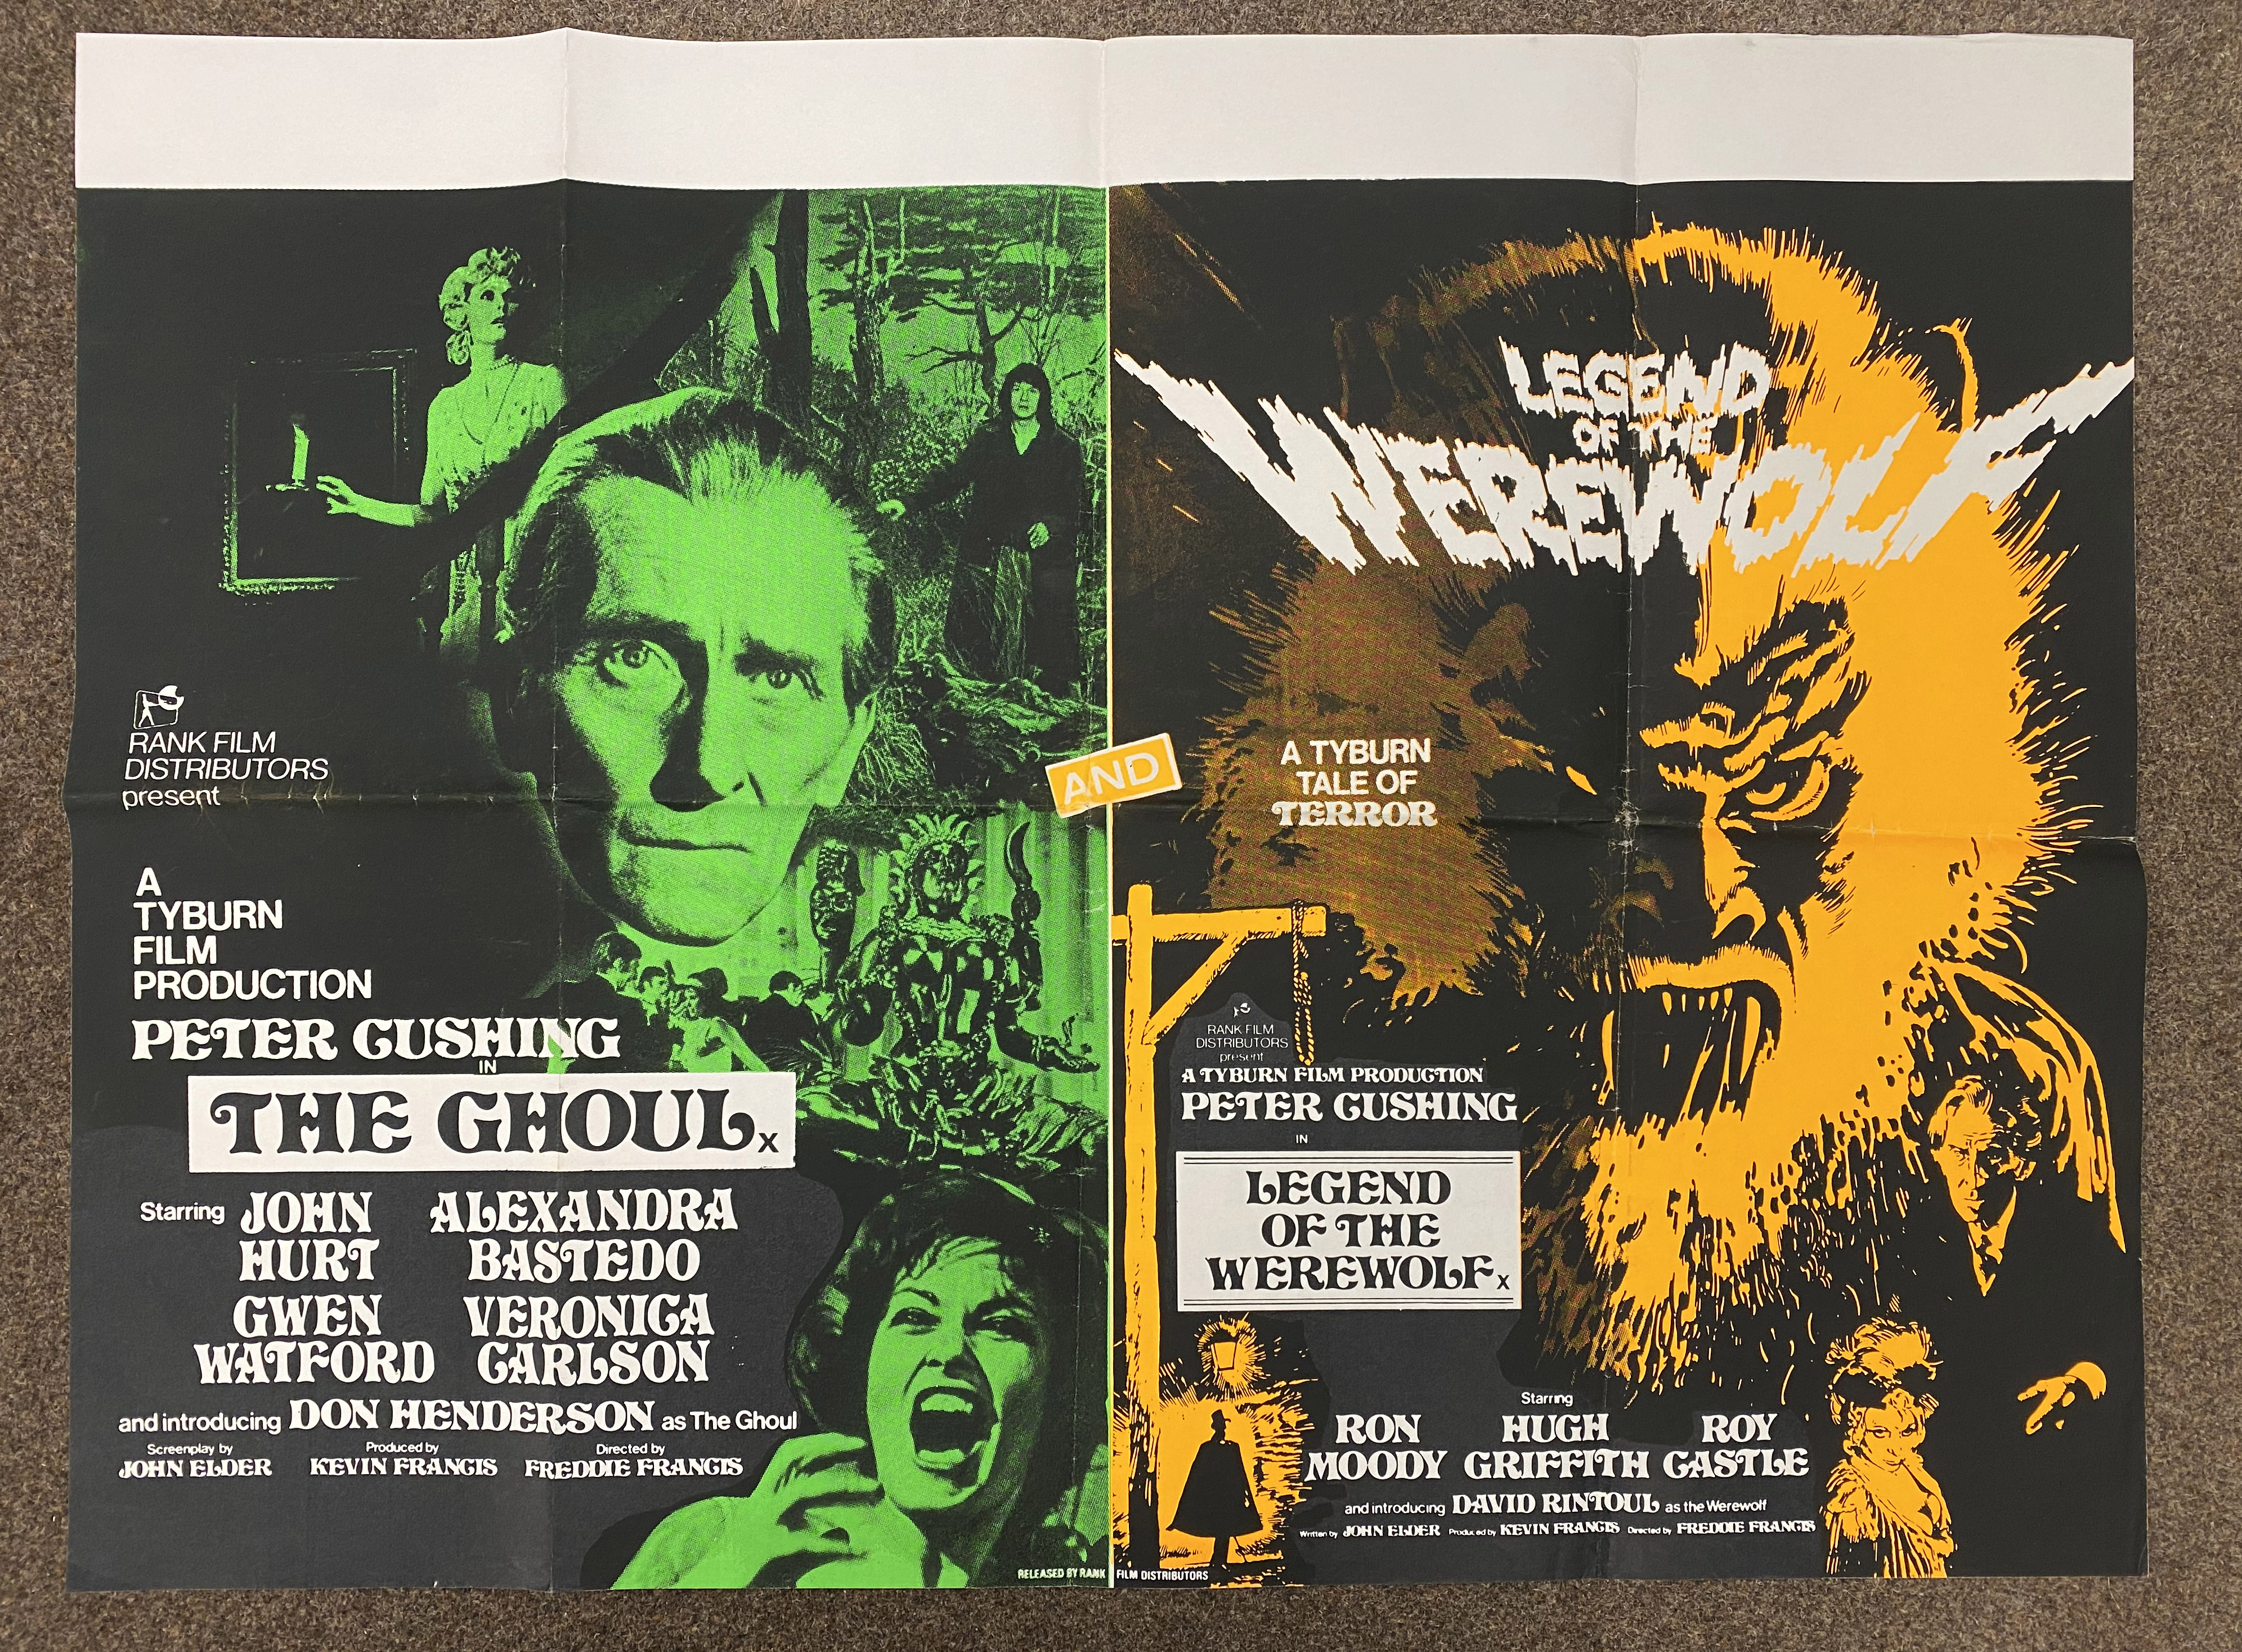 Peter Cushing - The Ghoul and Legend Of The Werewolf double-bill British Quad film poster, folded.